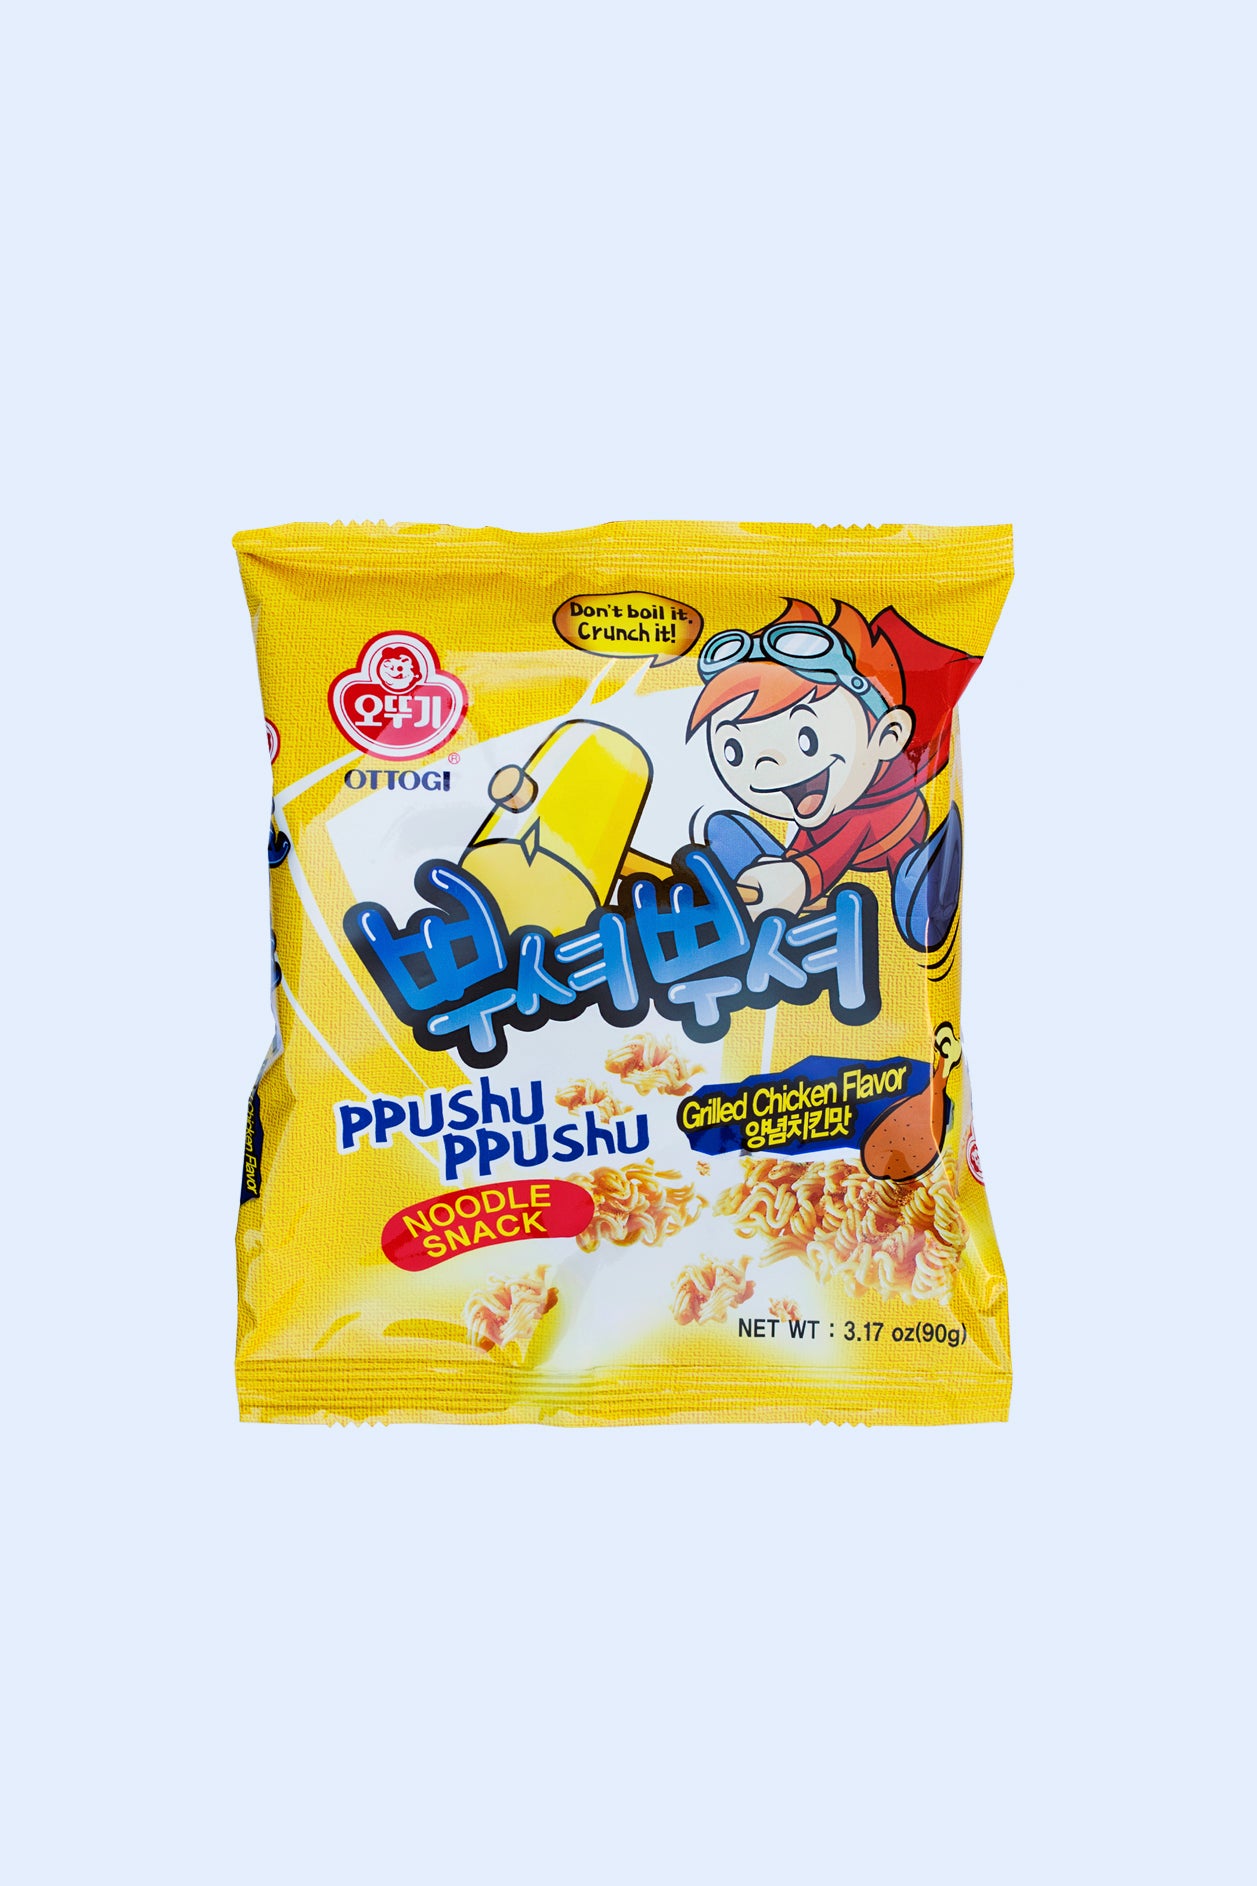 Ppushu Ppushu Noodle Snack